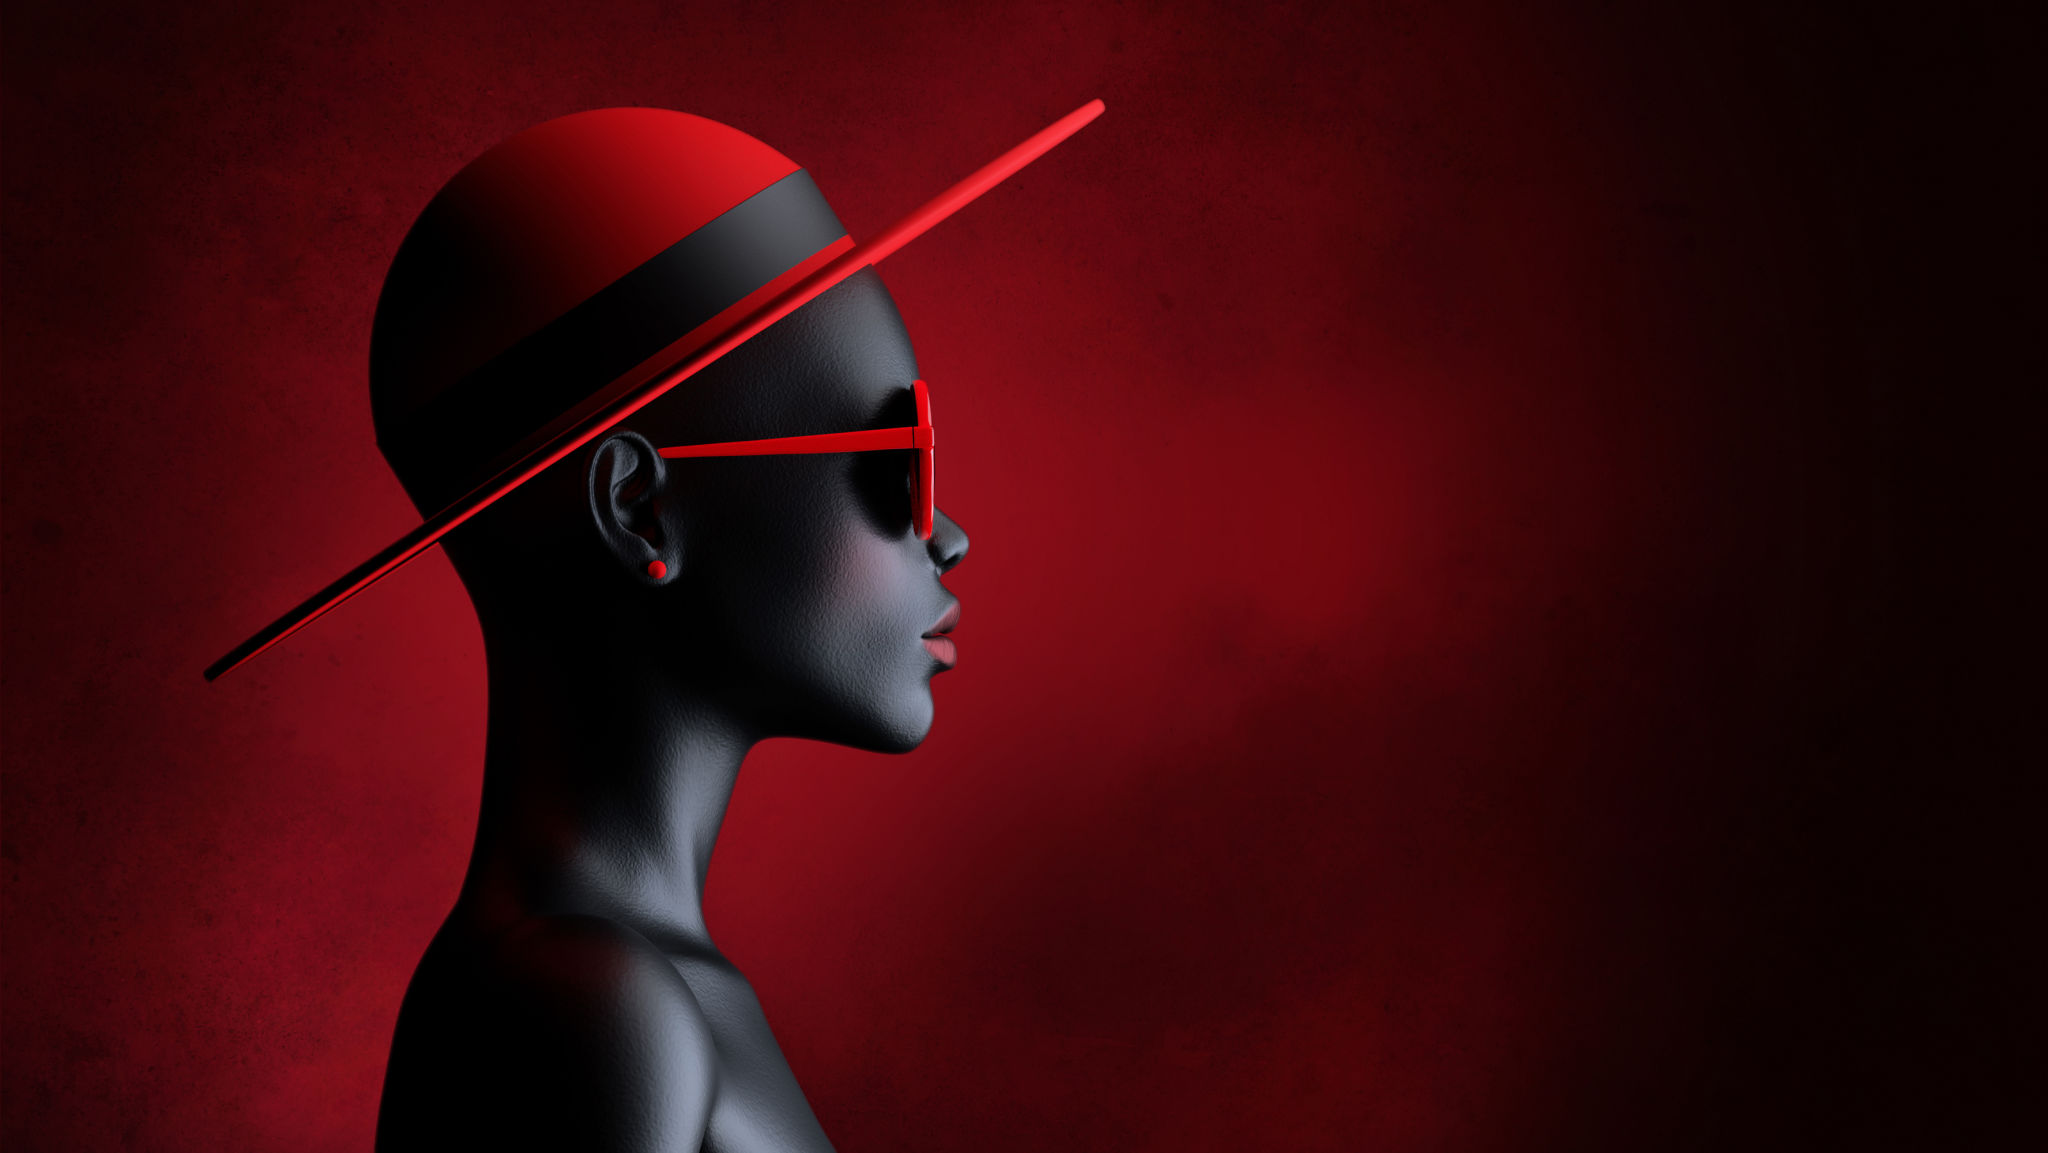 3D illustration of a black girl wearing sunglasses and a red hat